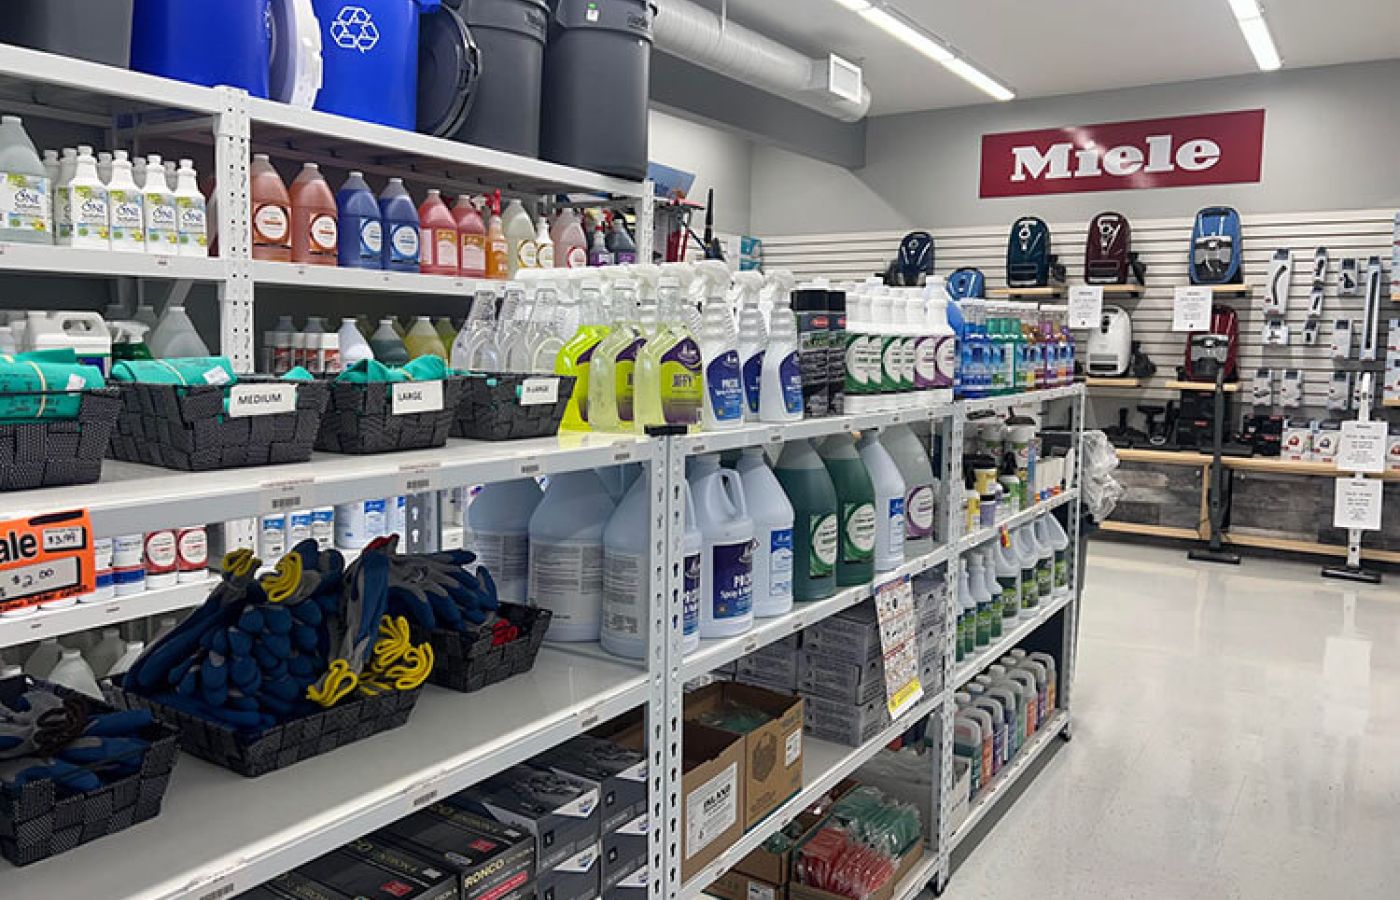 Display of cleaning supplies at Island Cleaning Supplies